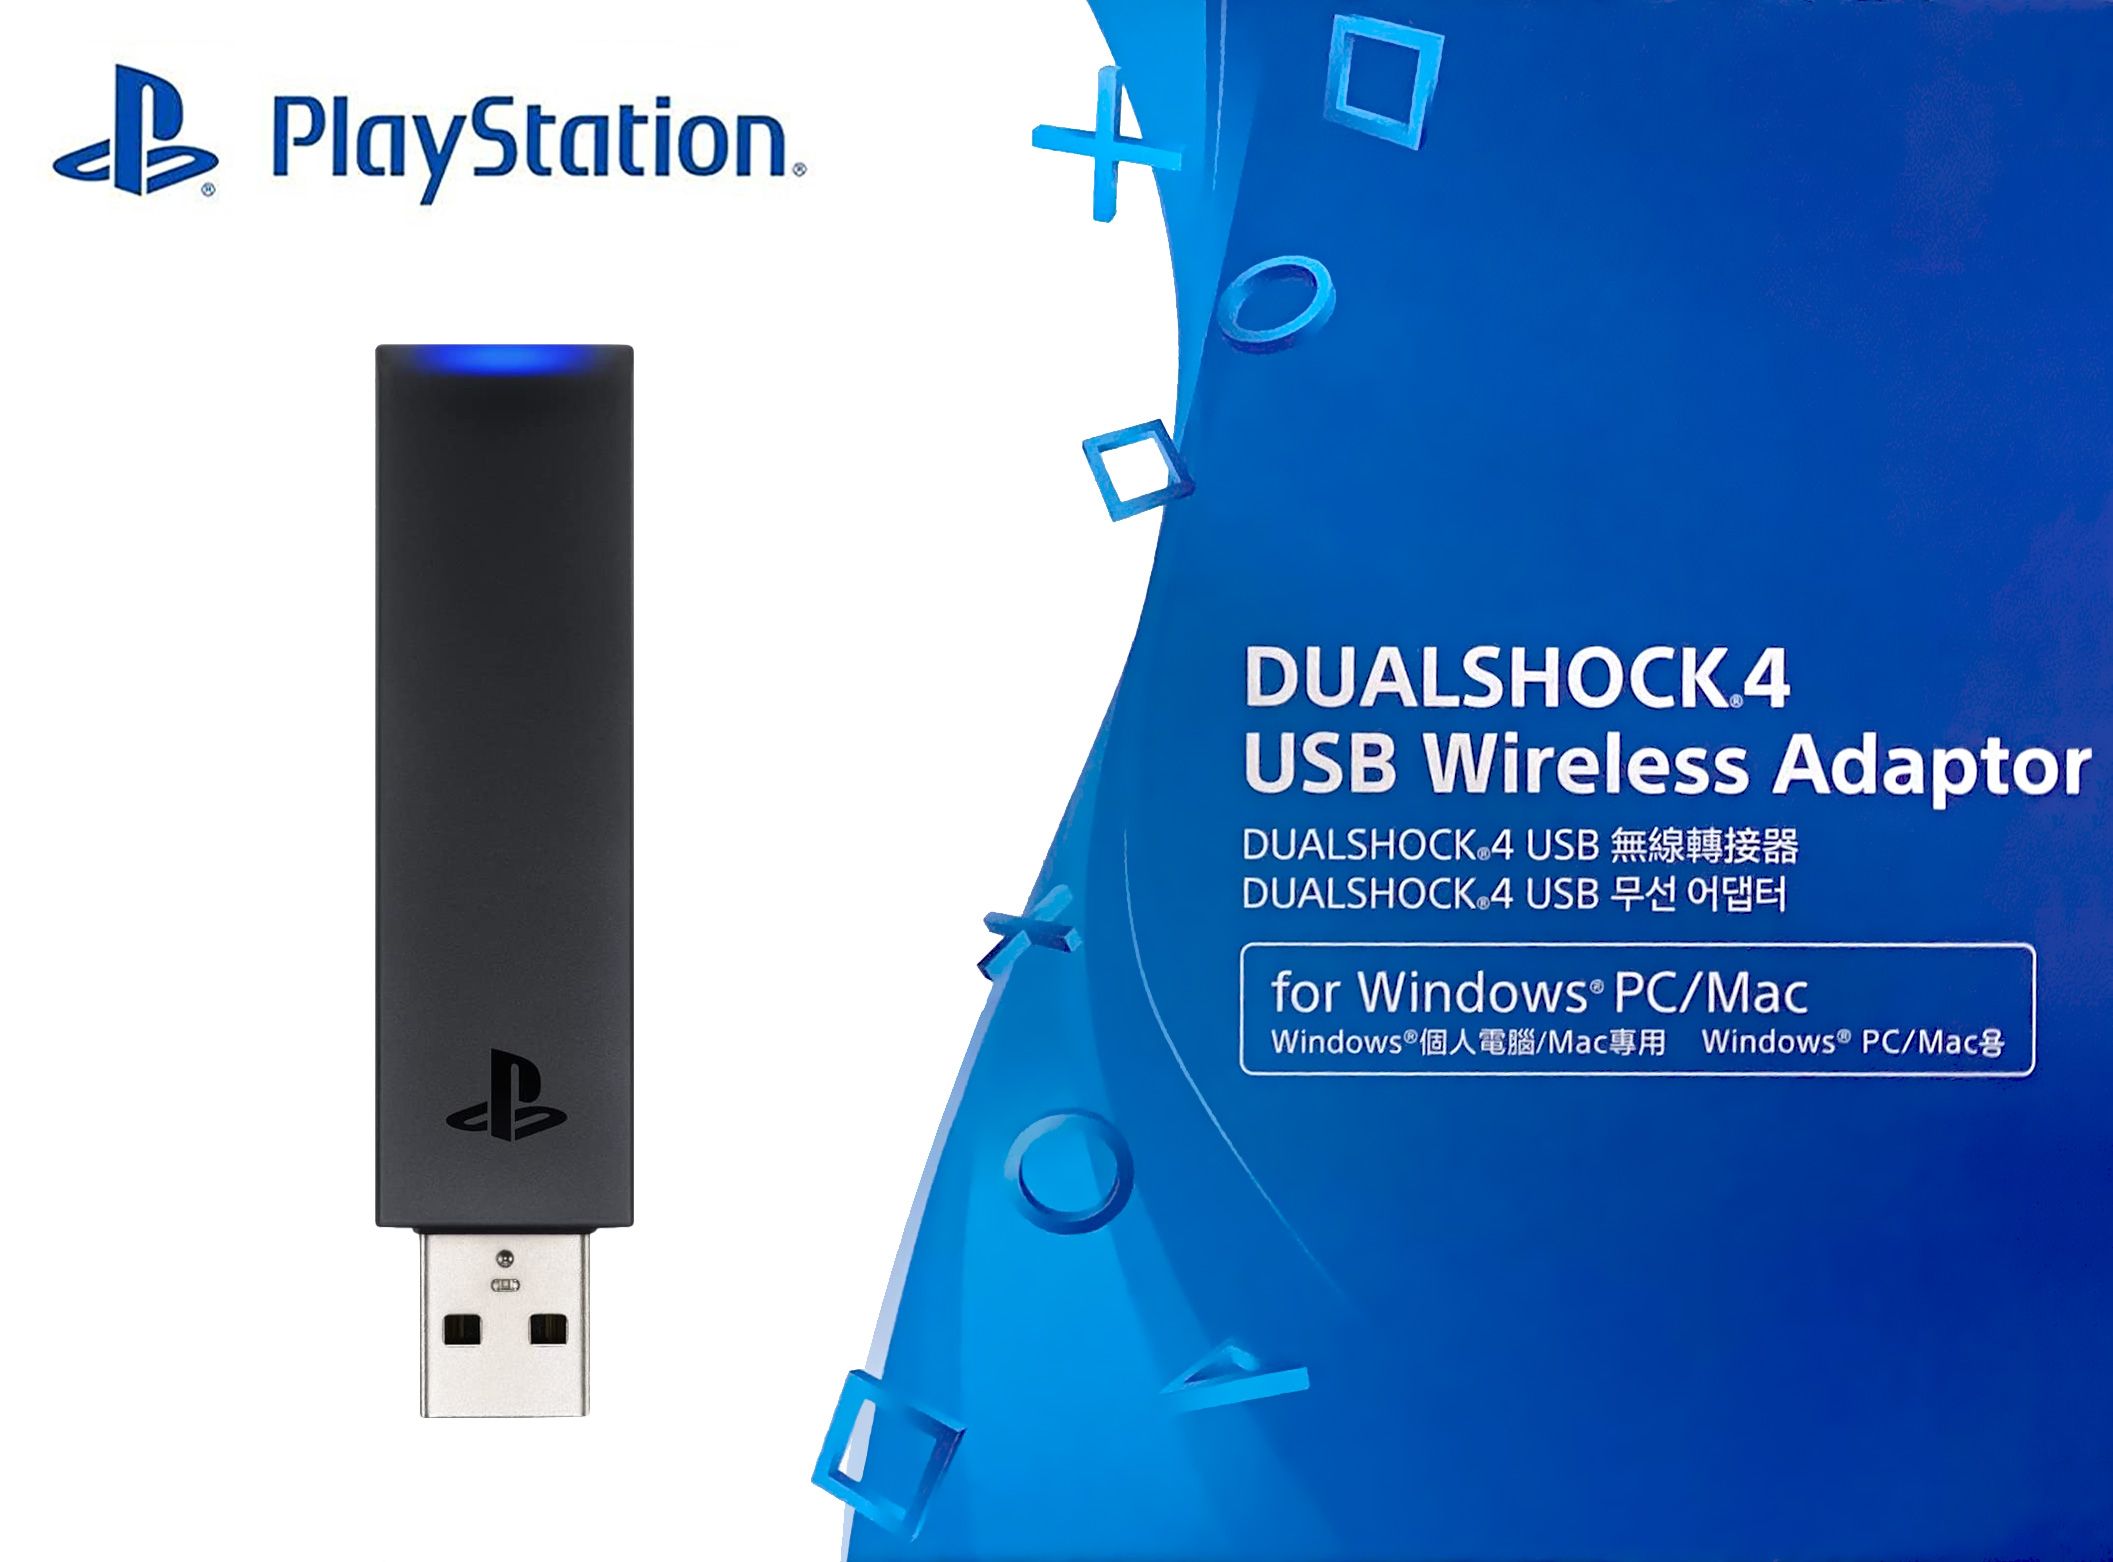 Accessory Bundles & Add Ons - Sony PlayStation DualShock 4 USB Wireless Adapter (PC)(New) - Sony (SIE / SCE) 400G was sold R1,480.00 on 18 Apr at 01:27 by Pwned in Cape Town (ID:578544502)